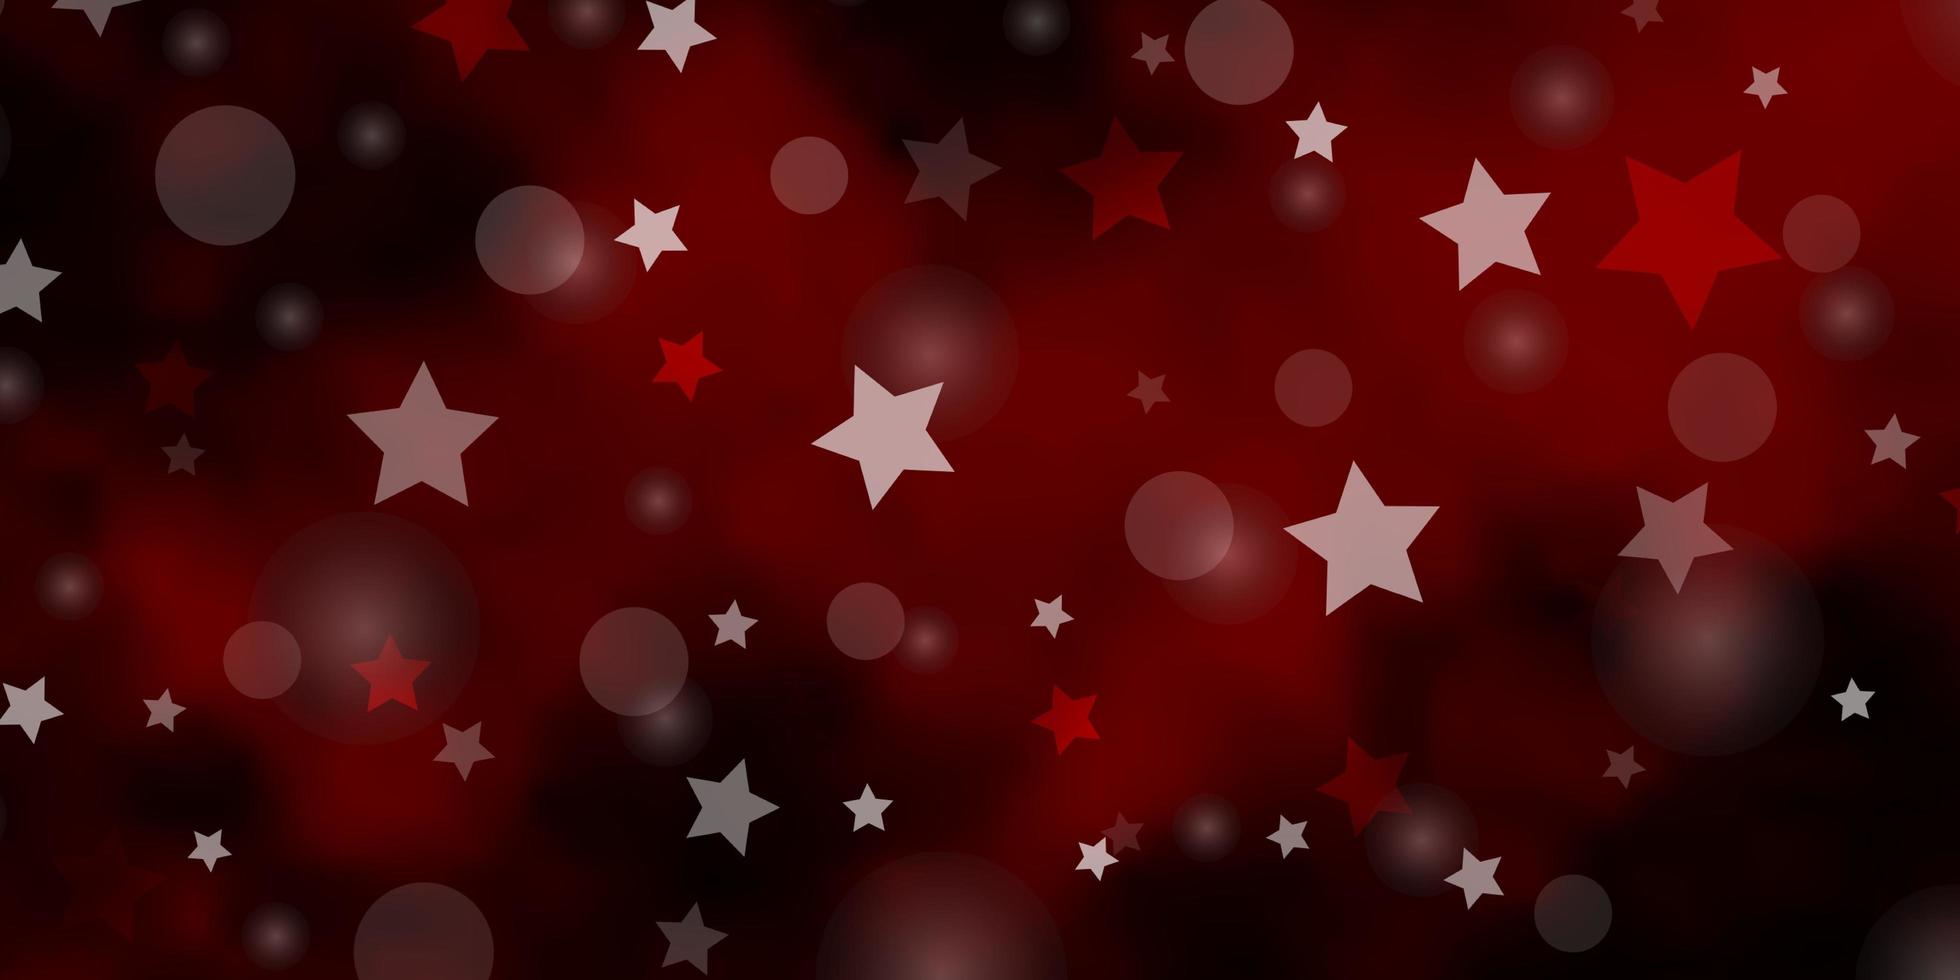 Dark Red vector layout with circles, stars.